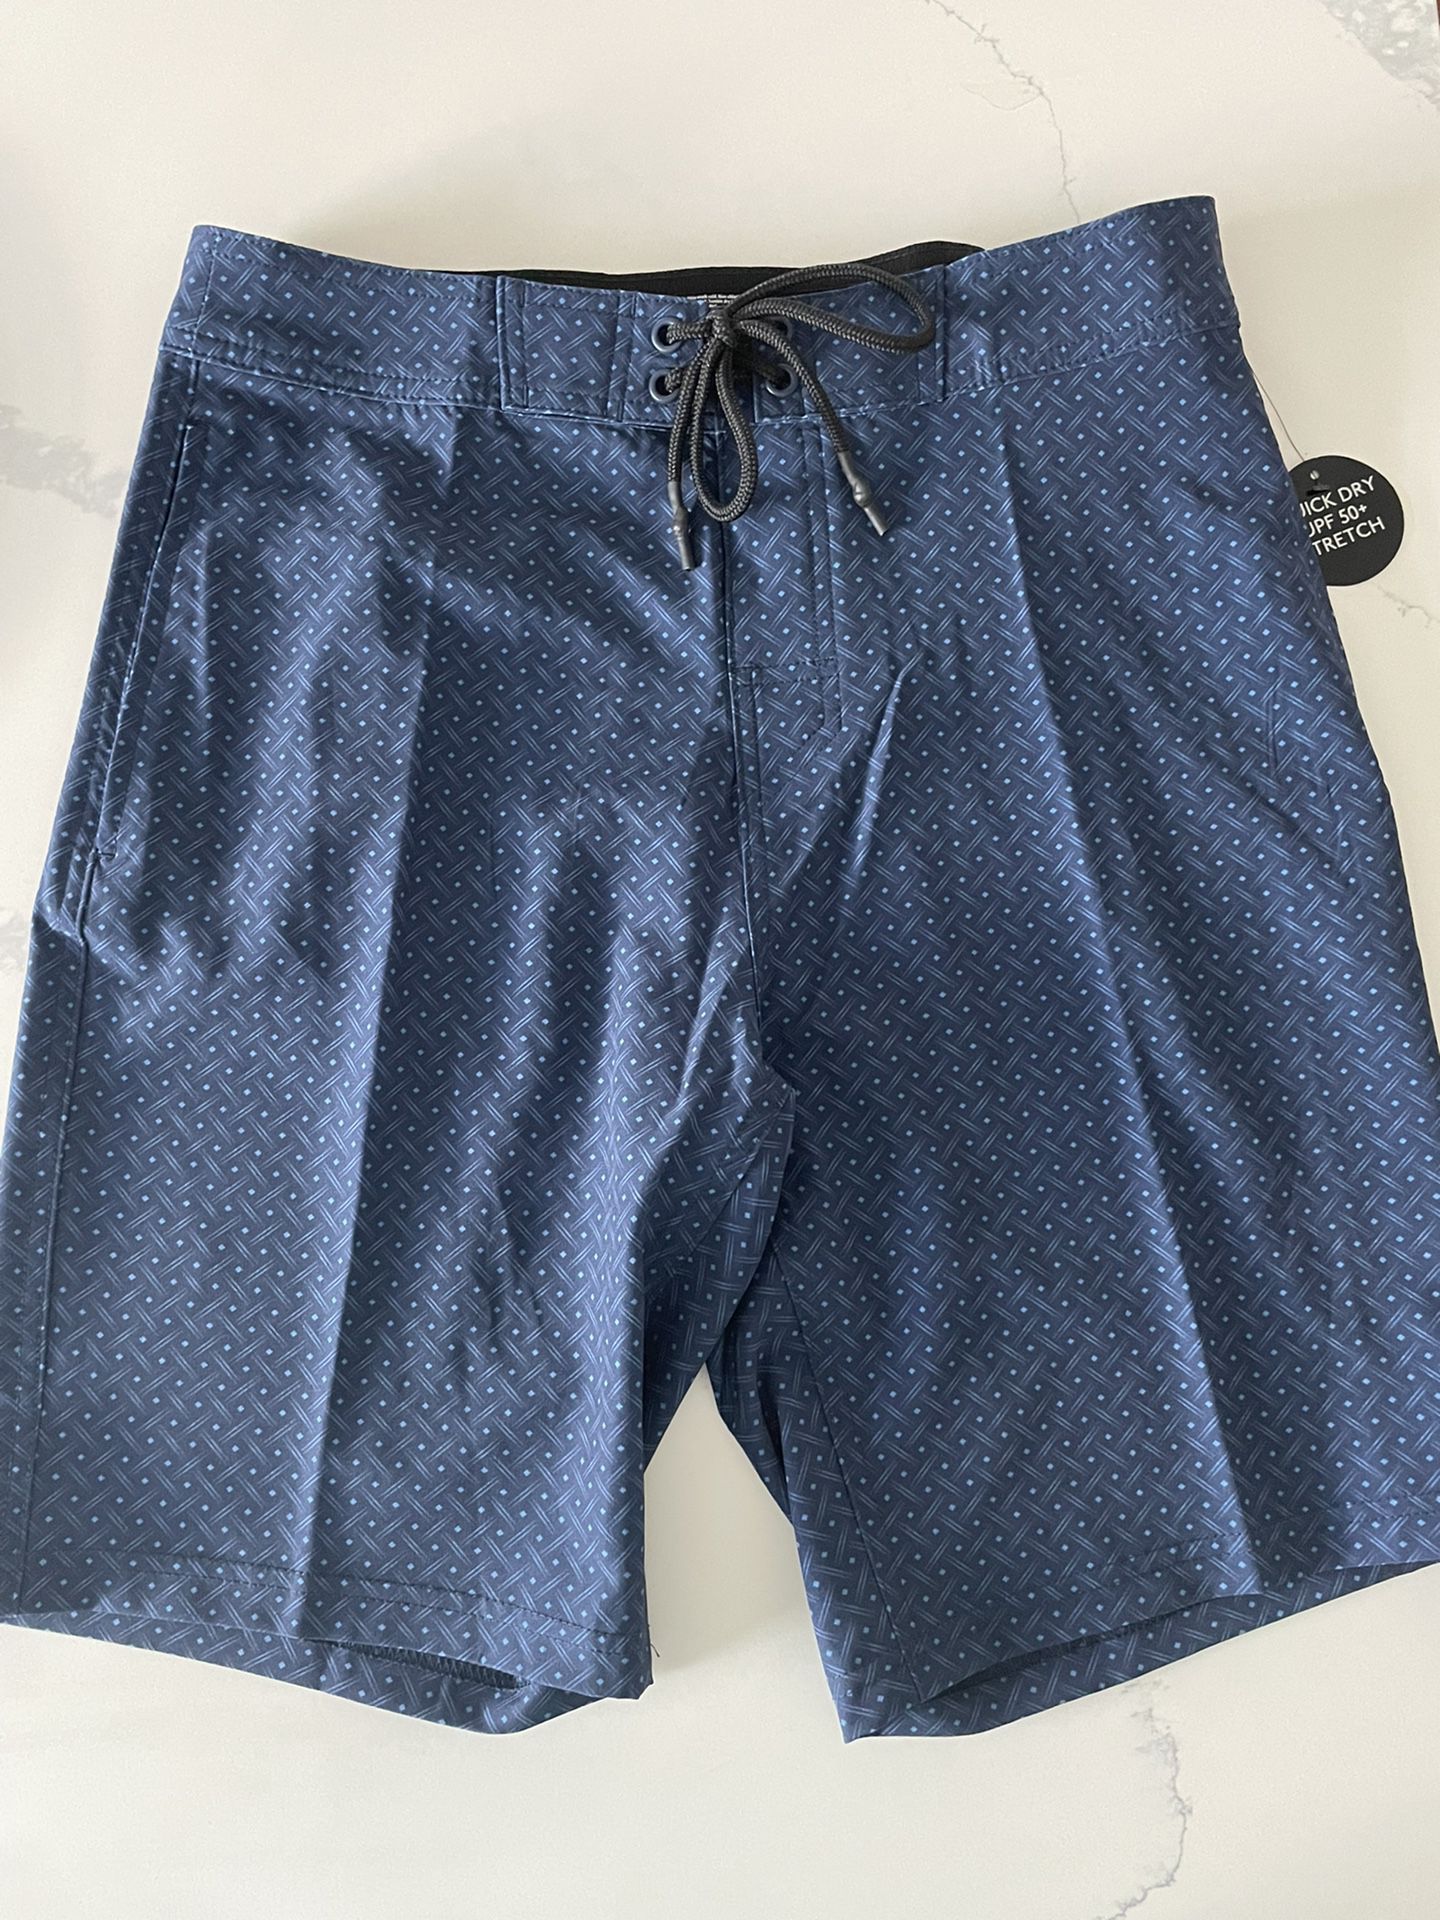 Men's Swimming Suit Size M for Sale in Huntingtn Sta, NY - OfferUp